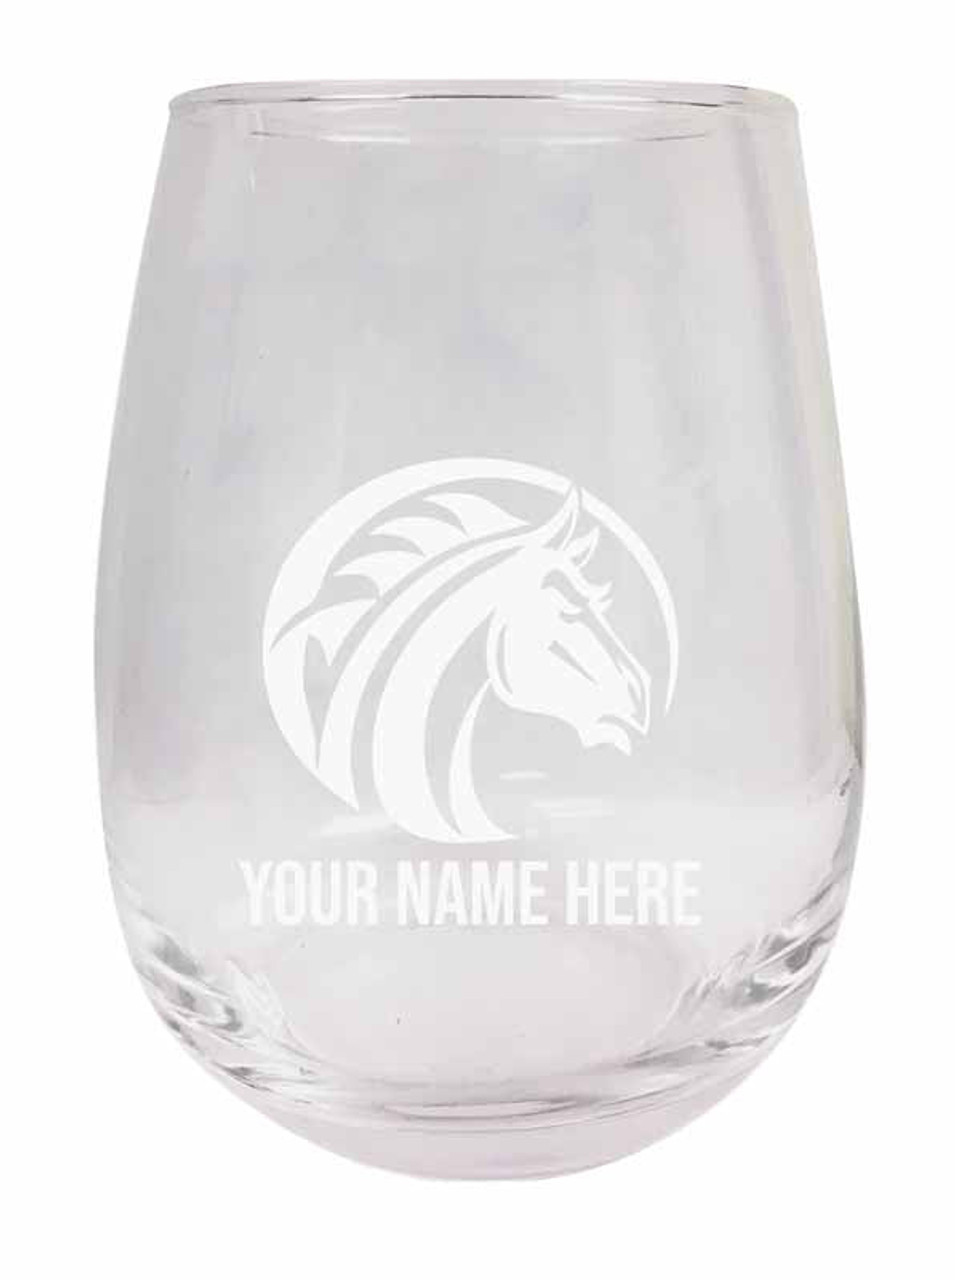 Personalized Customizable Fayetteville State University Etched Stemless Wine Glass 9 oz With Custom Name